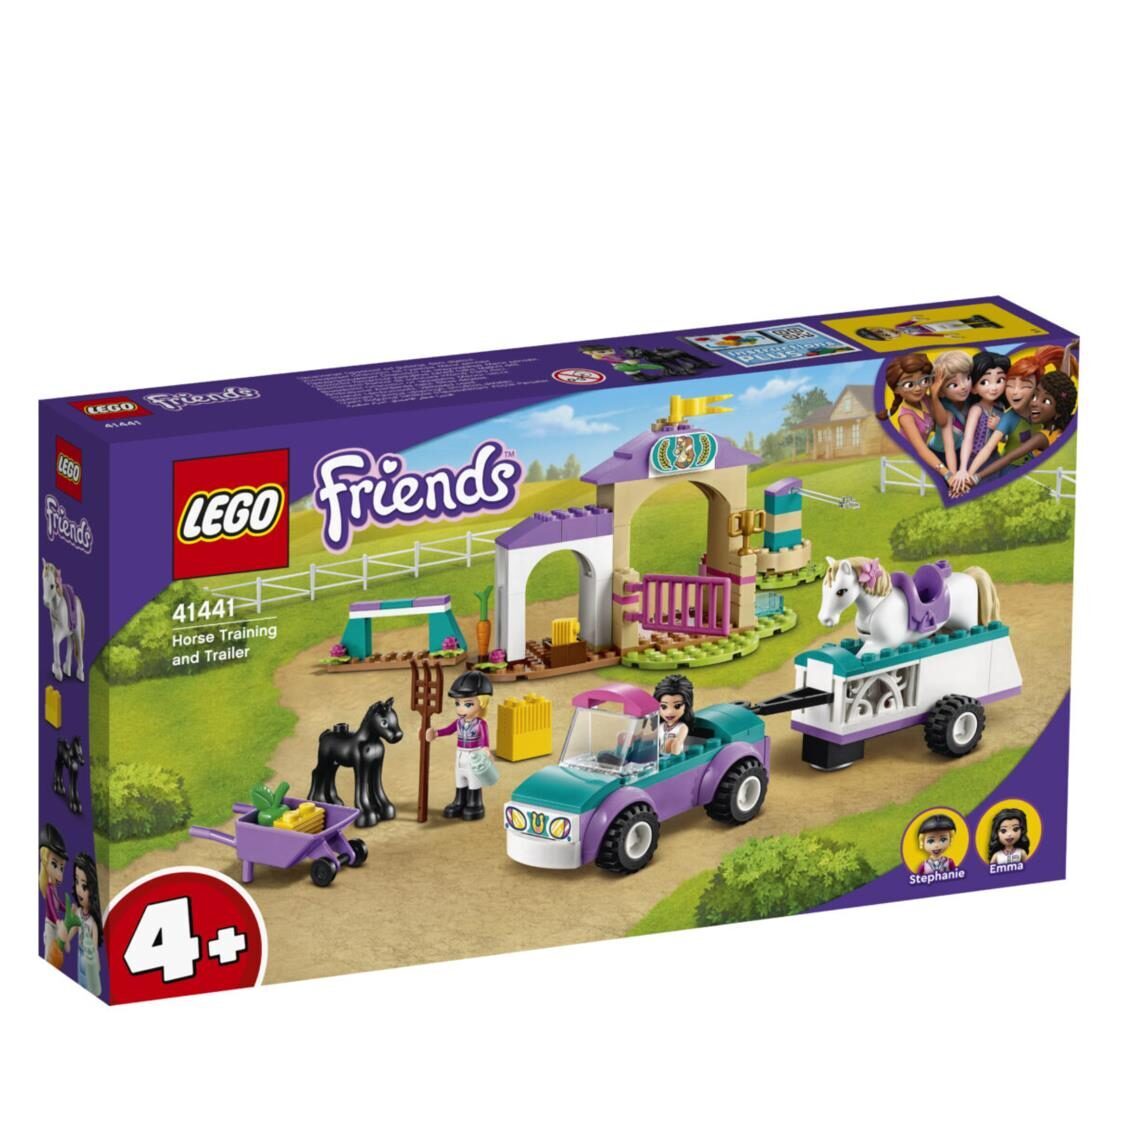 LEGO Friends - Horse Training and Trailer 41441